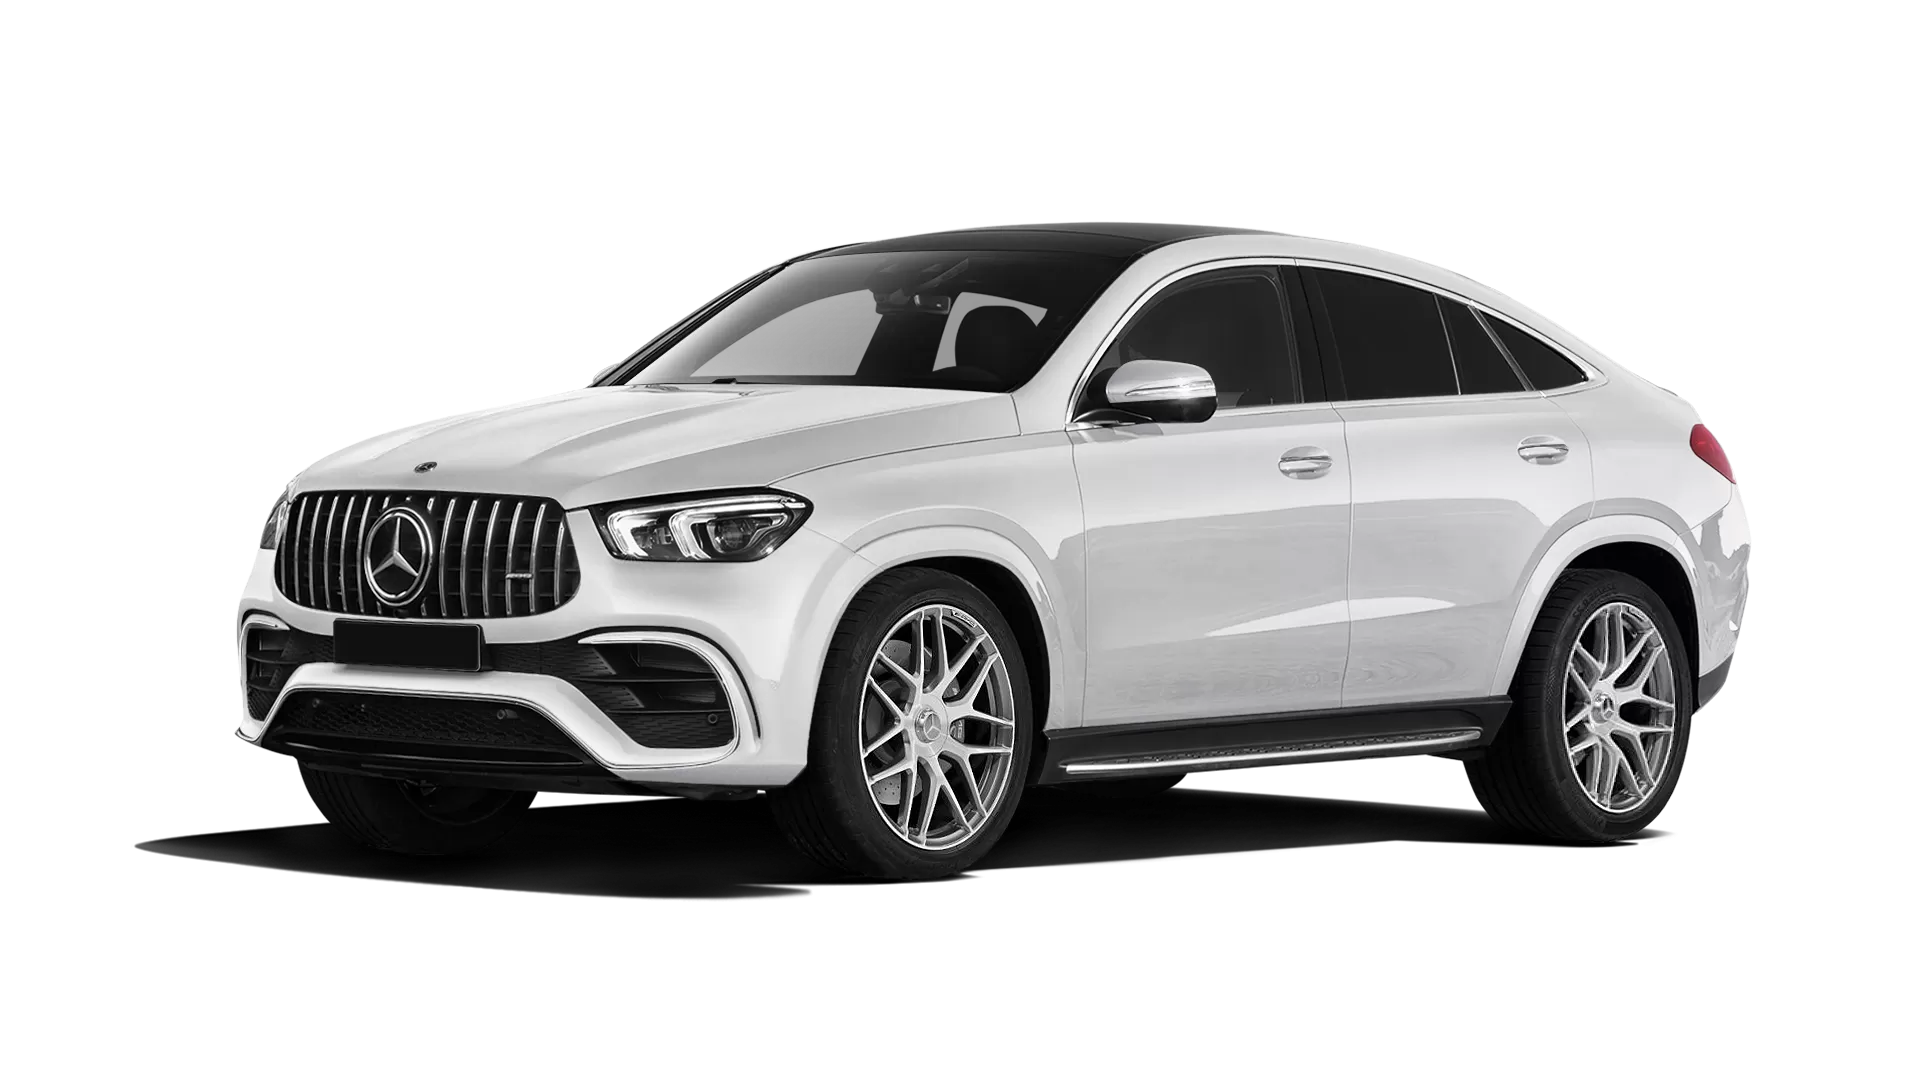 Mercedes GLE Coupe AMG 63 C167 stock front view in Polar White color